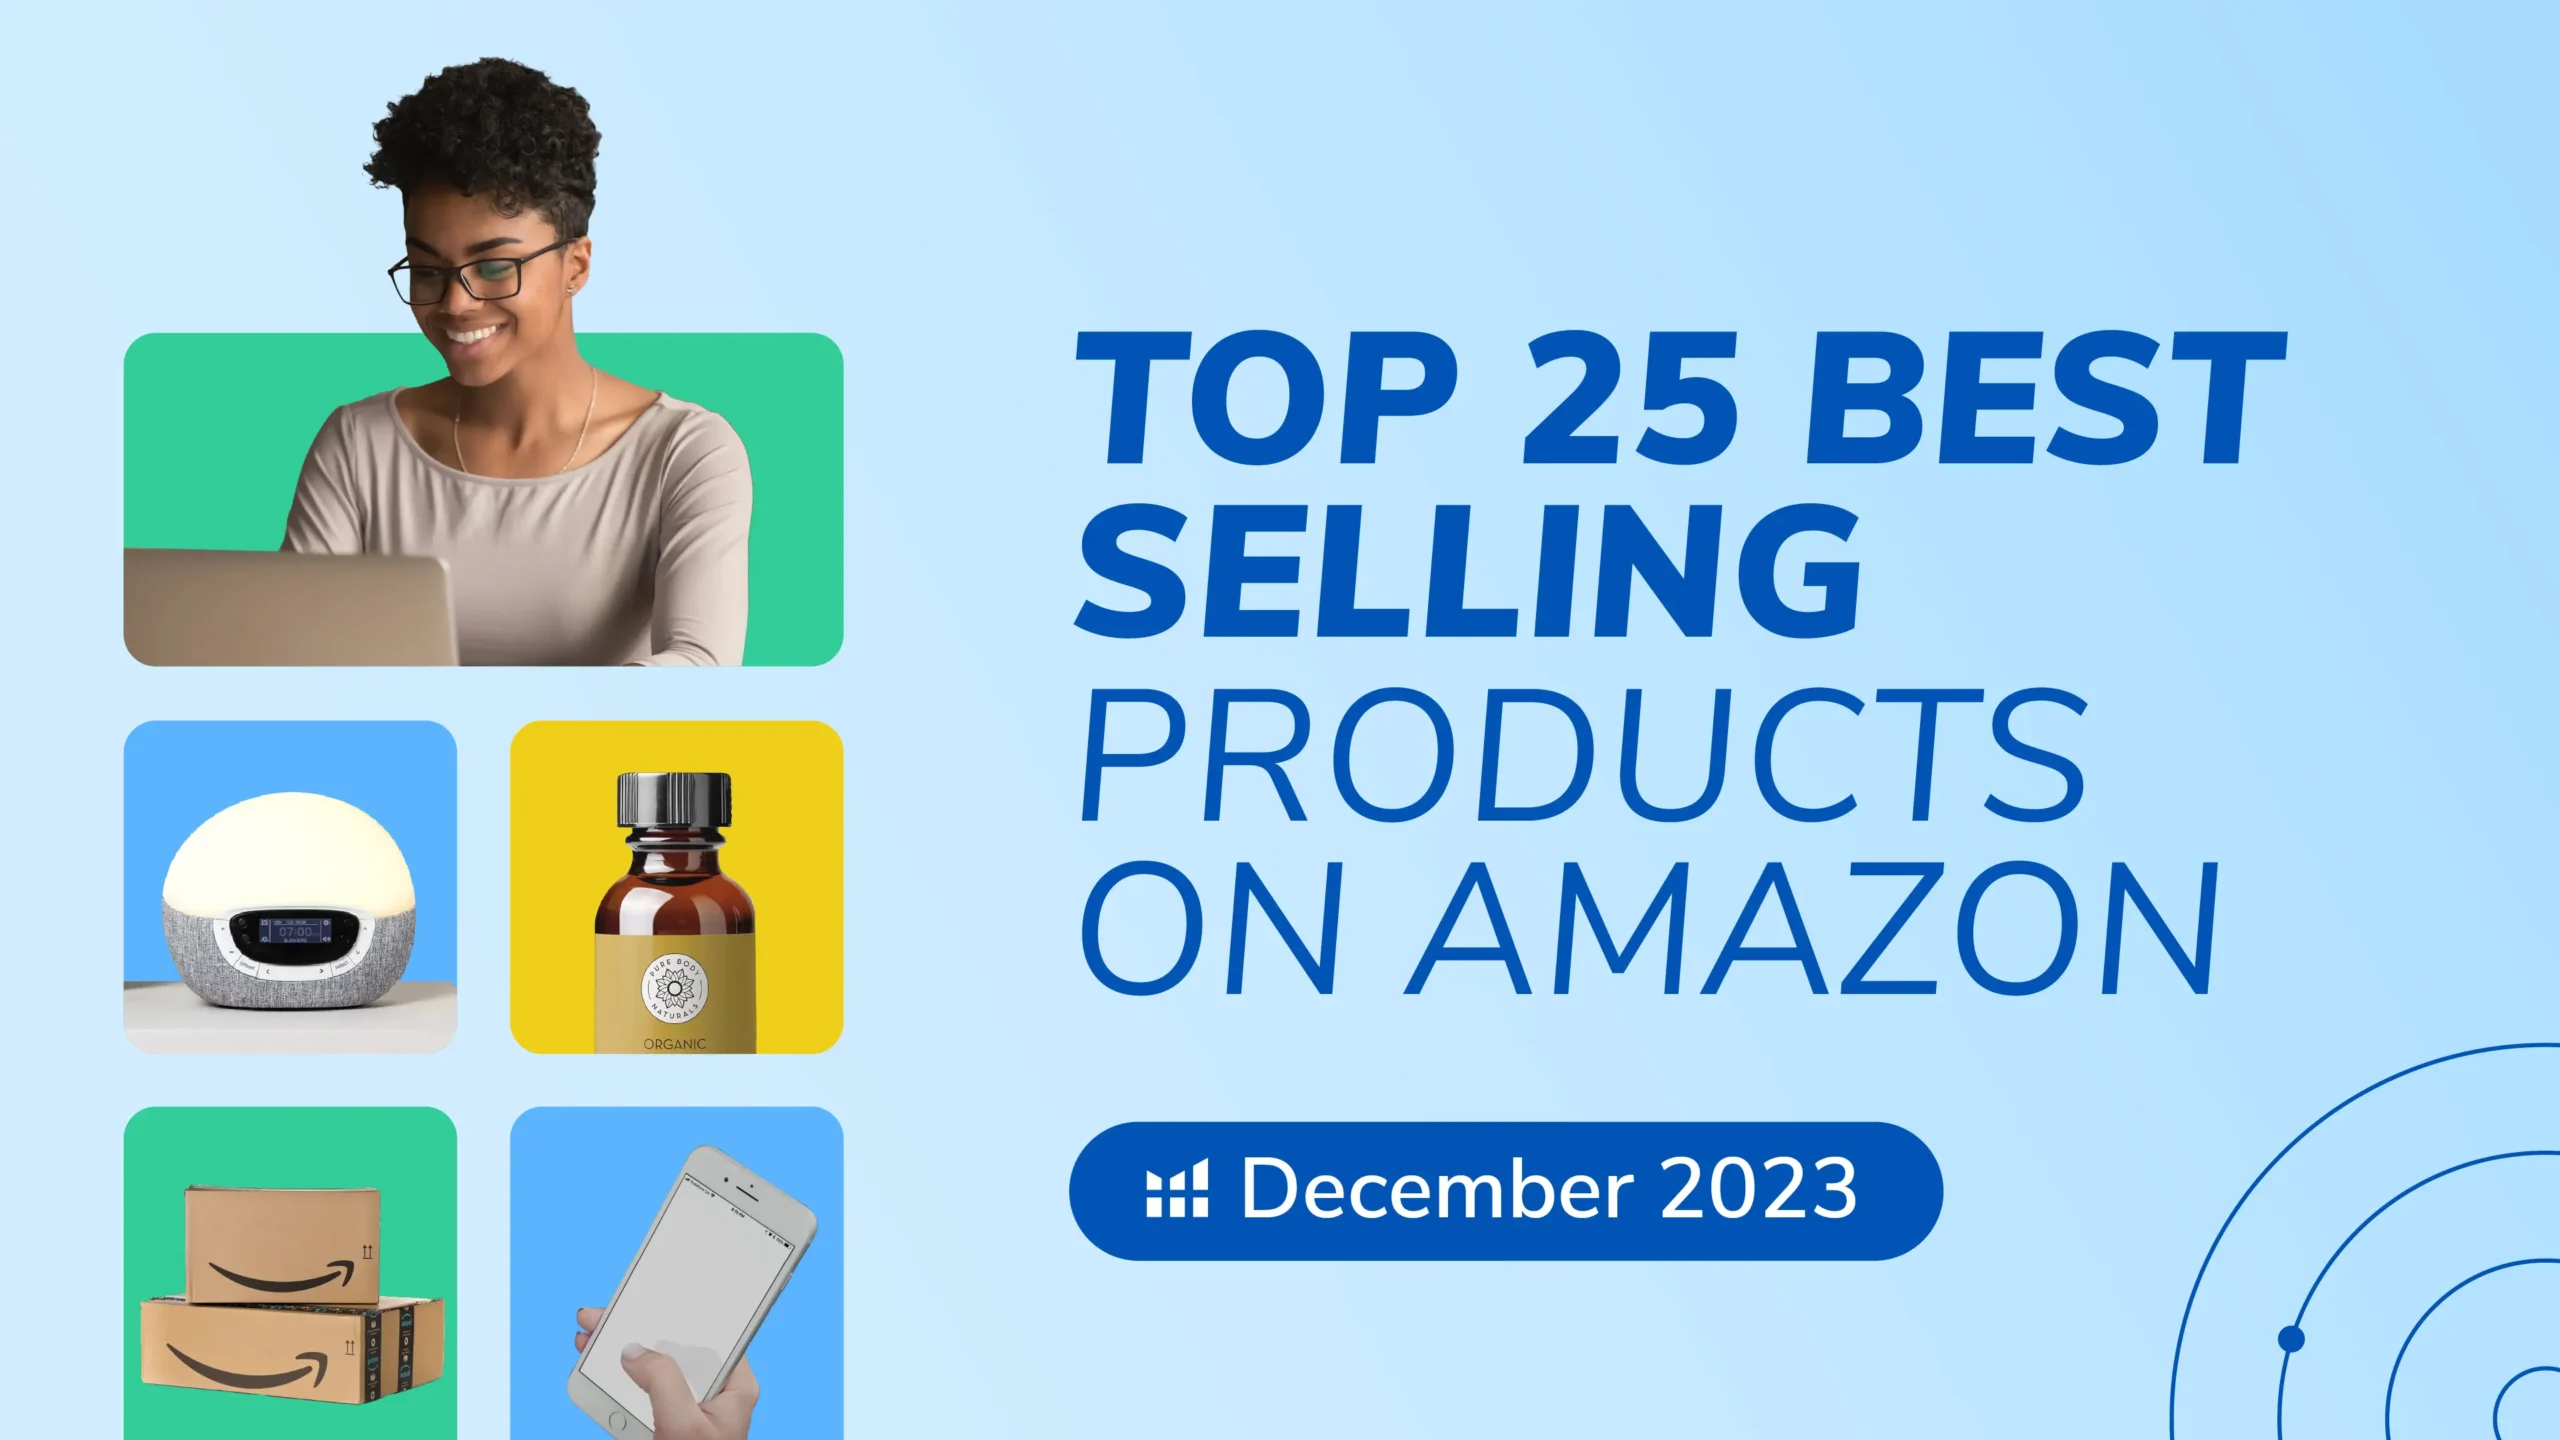 Top 25 Best Selling Products on Amazon December 2023